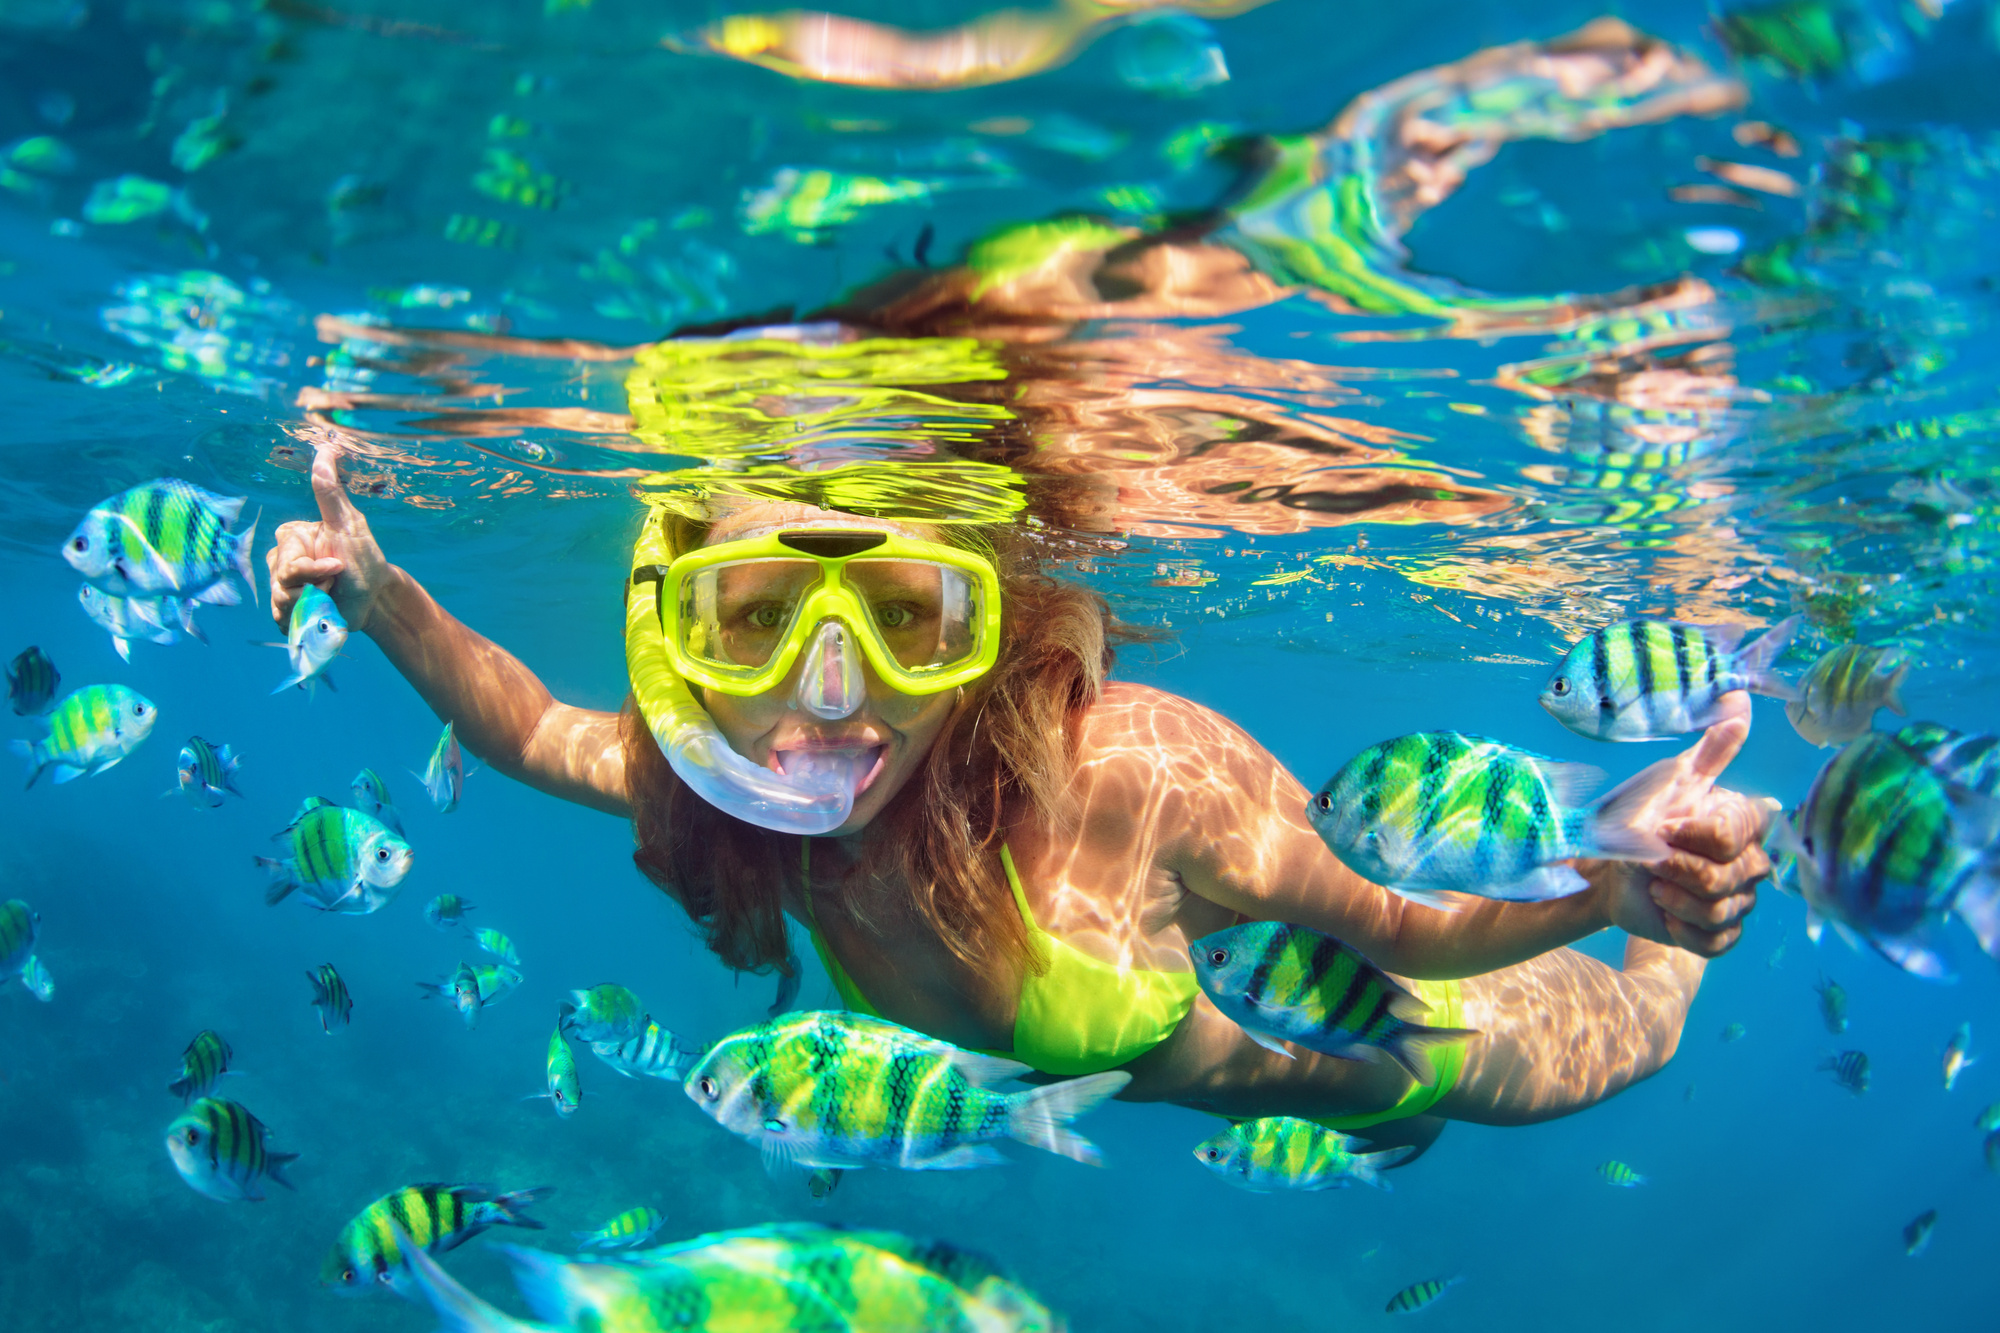 snorkeling trip meaning